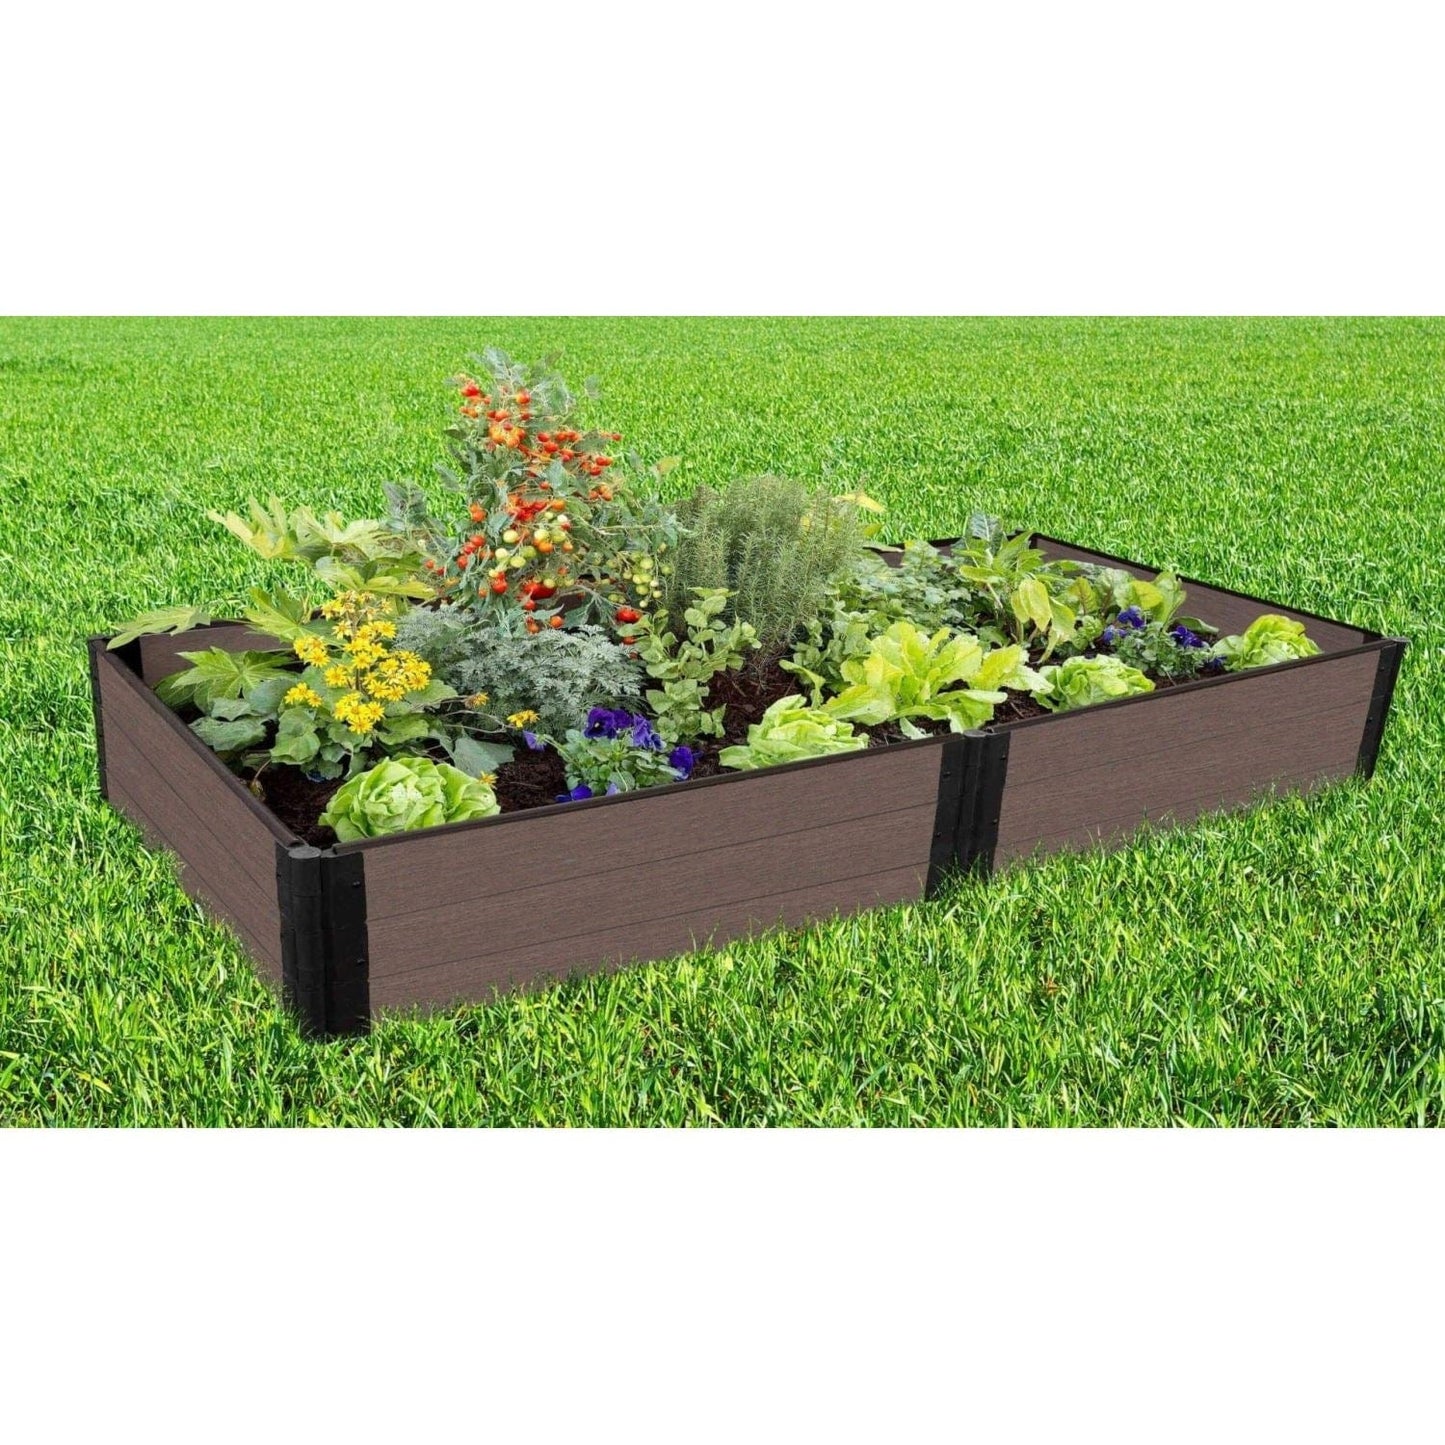 Frame It All Gardening Accessories Frame It All | Weathered Wood Raised Garden Bed 4' X 8' X 16.5" 1 Inch Profile - 3 Level 300001442